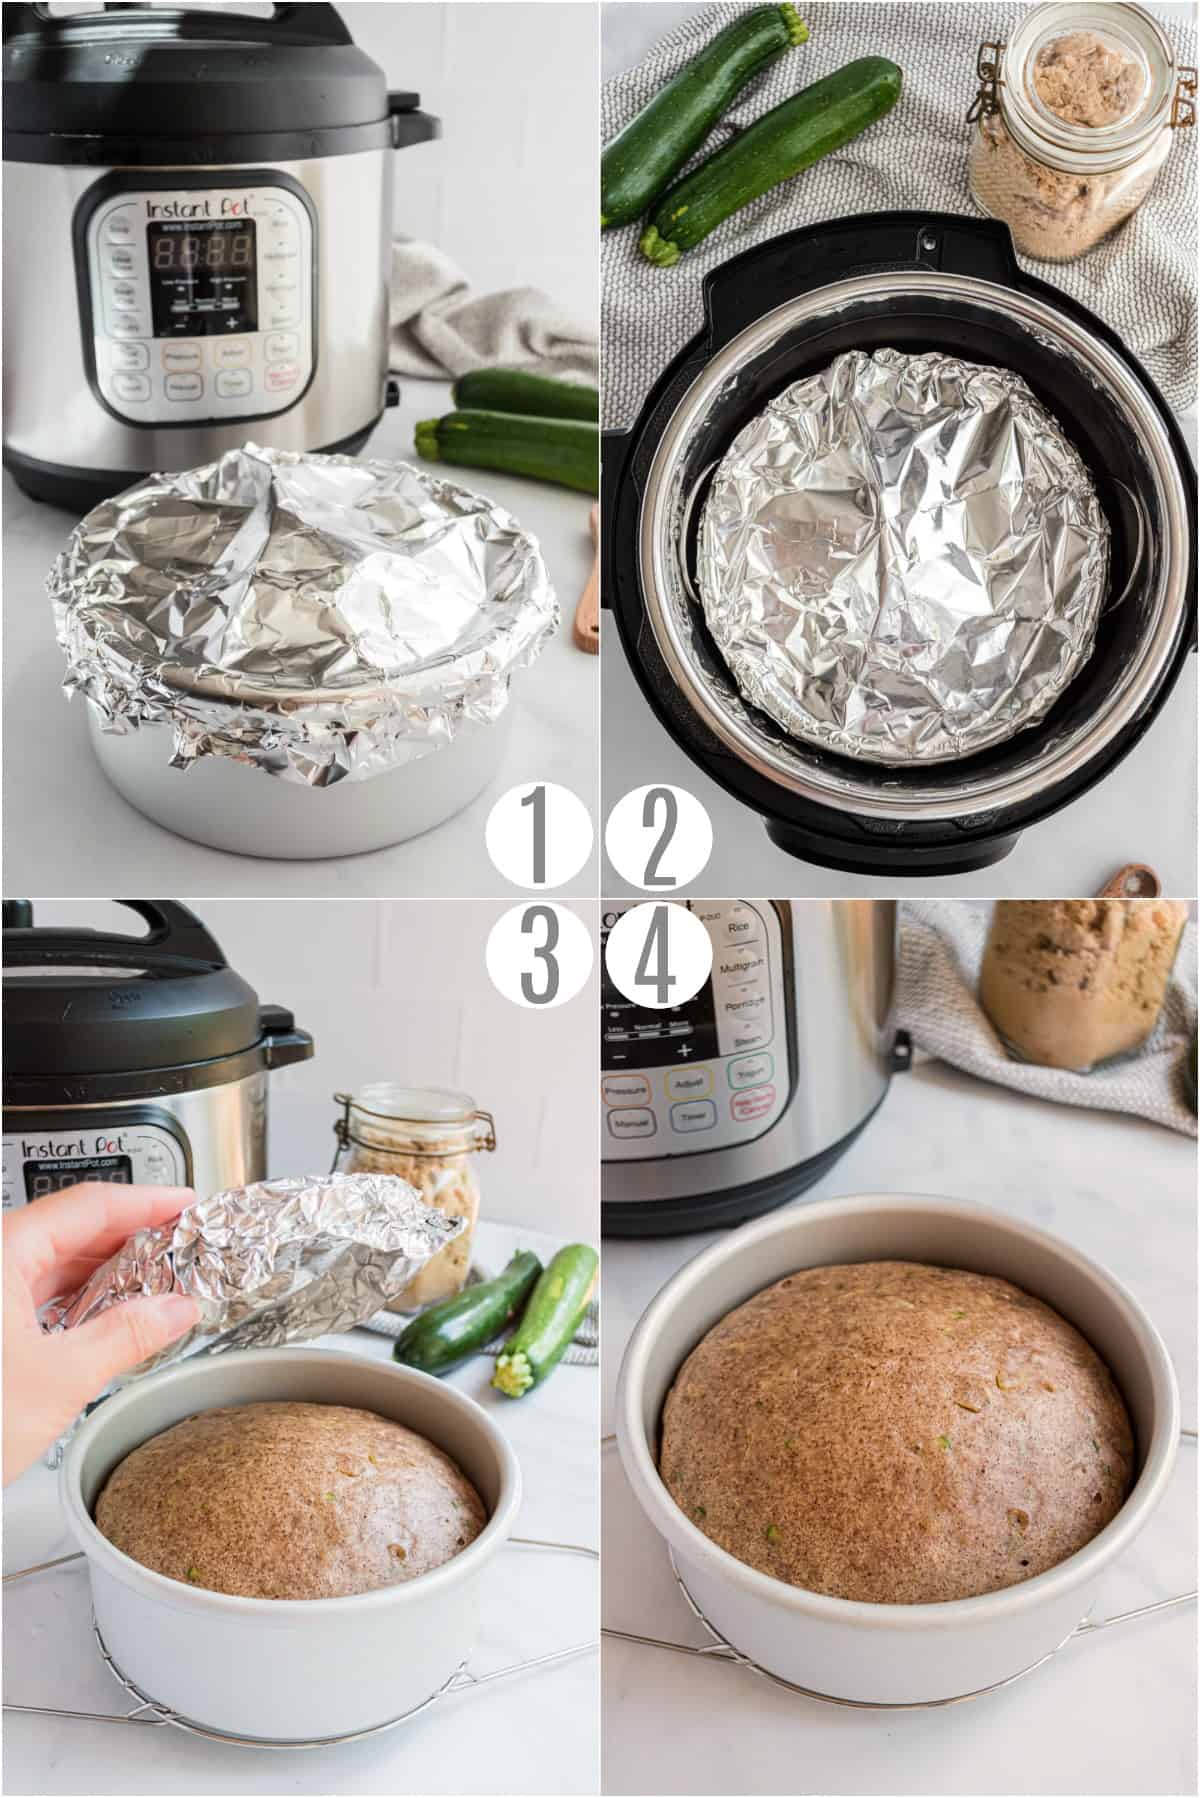 Step by step photos showing how to put zucchini bread in the instapot.